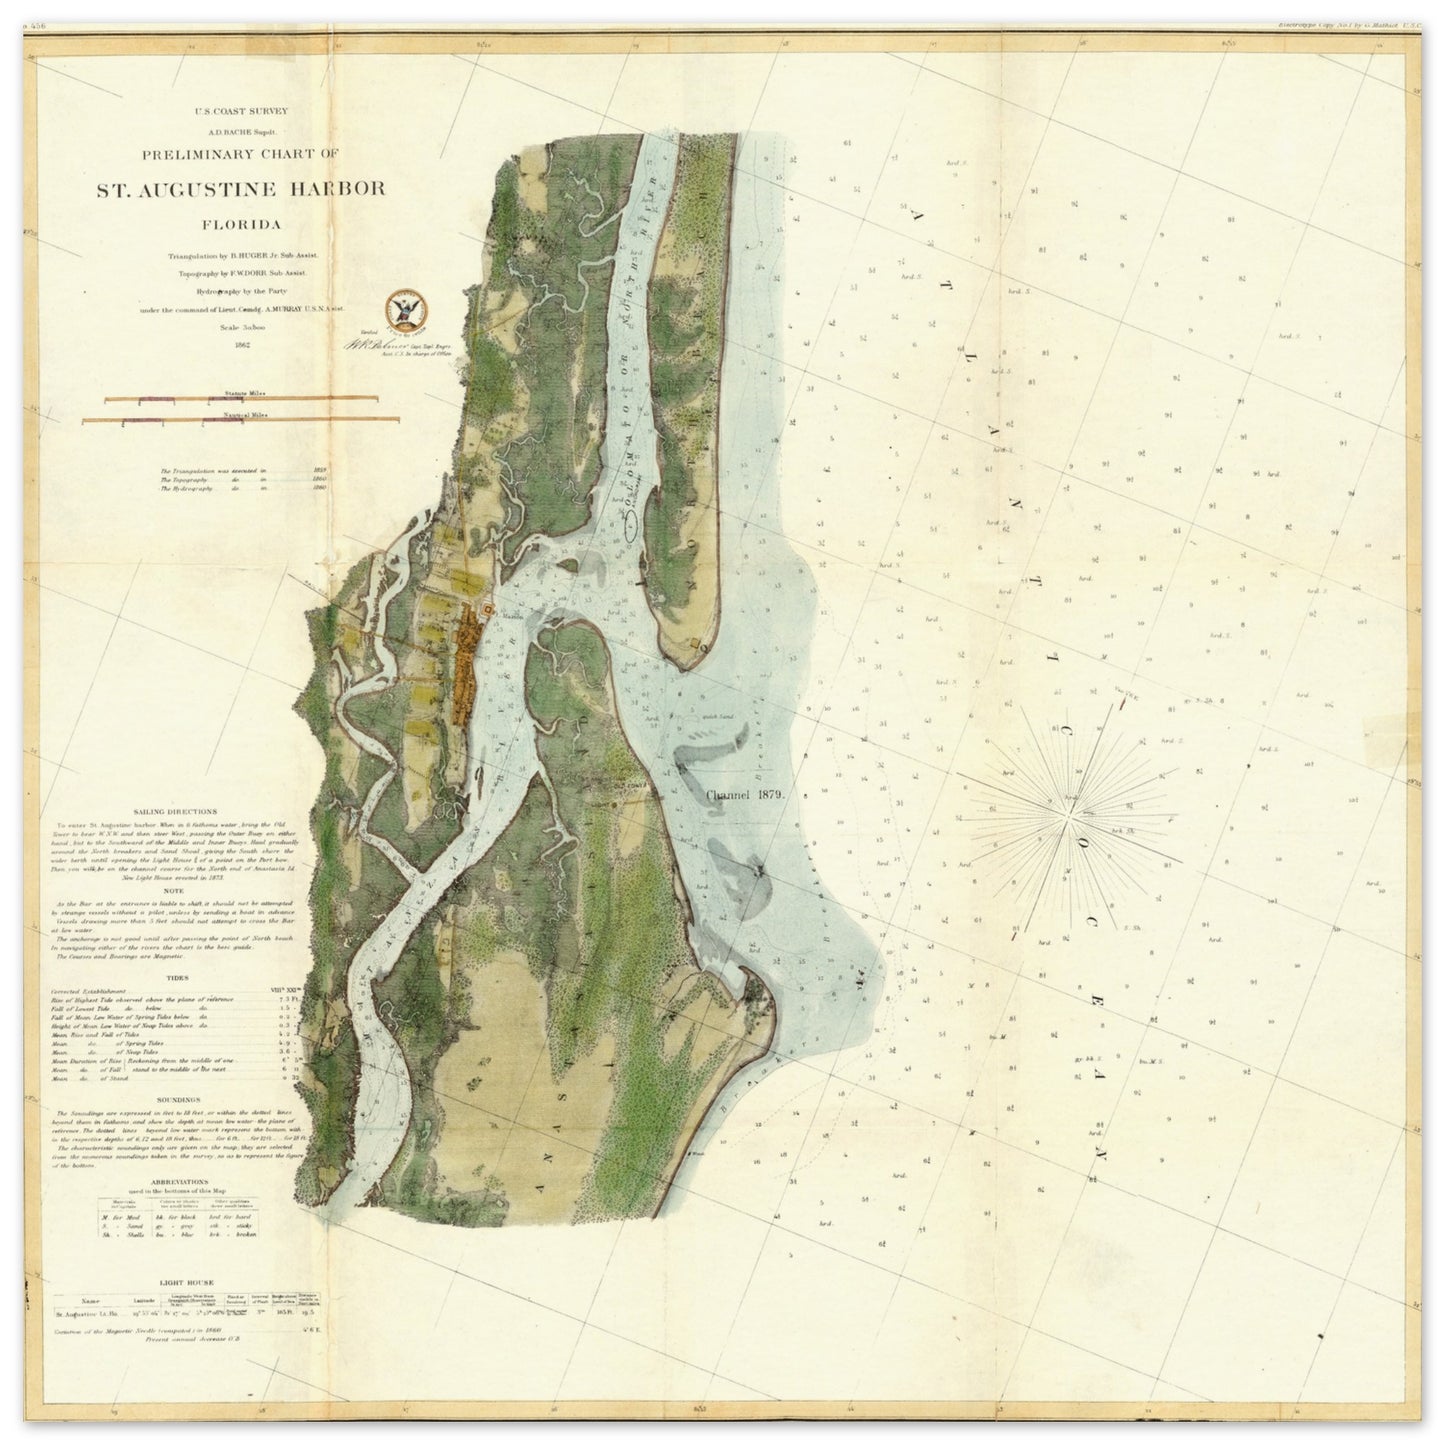 Saint Augustine Harbor nautical chart from 1879, printed on museum-quality matte paper